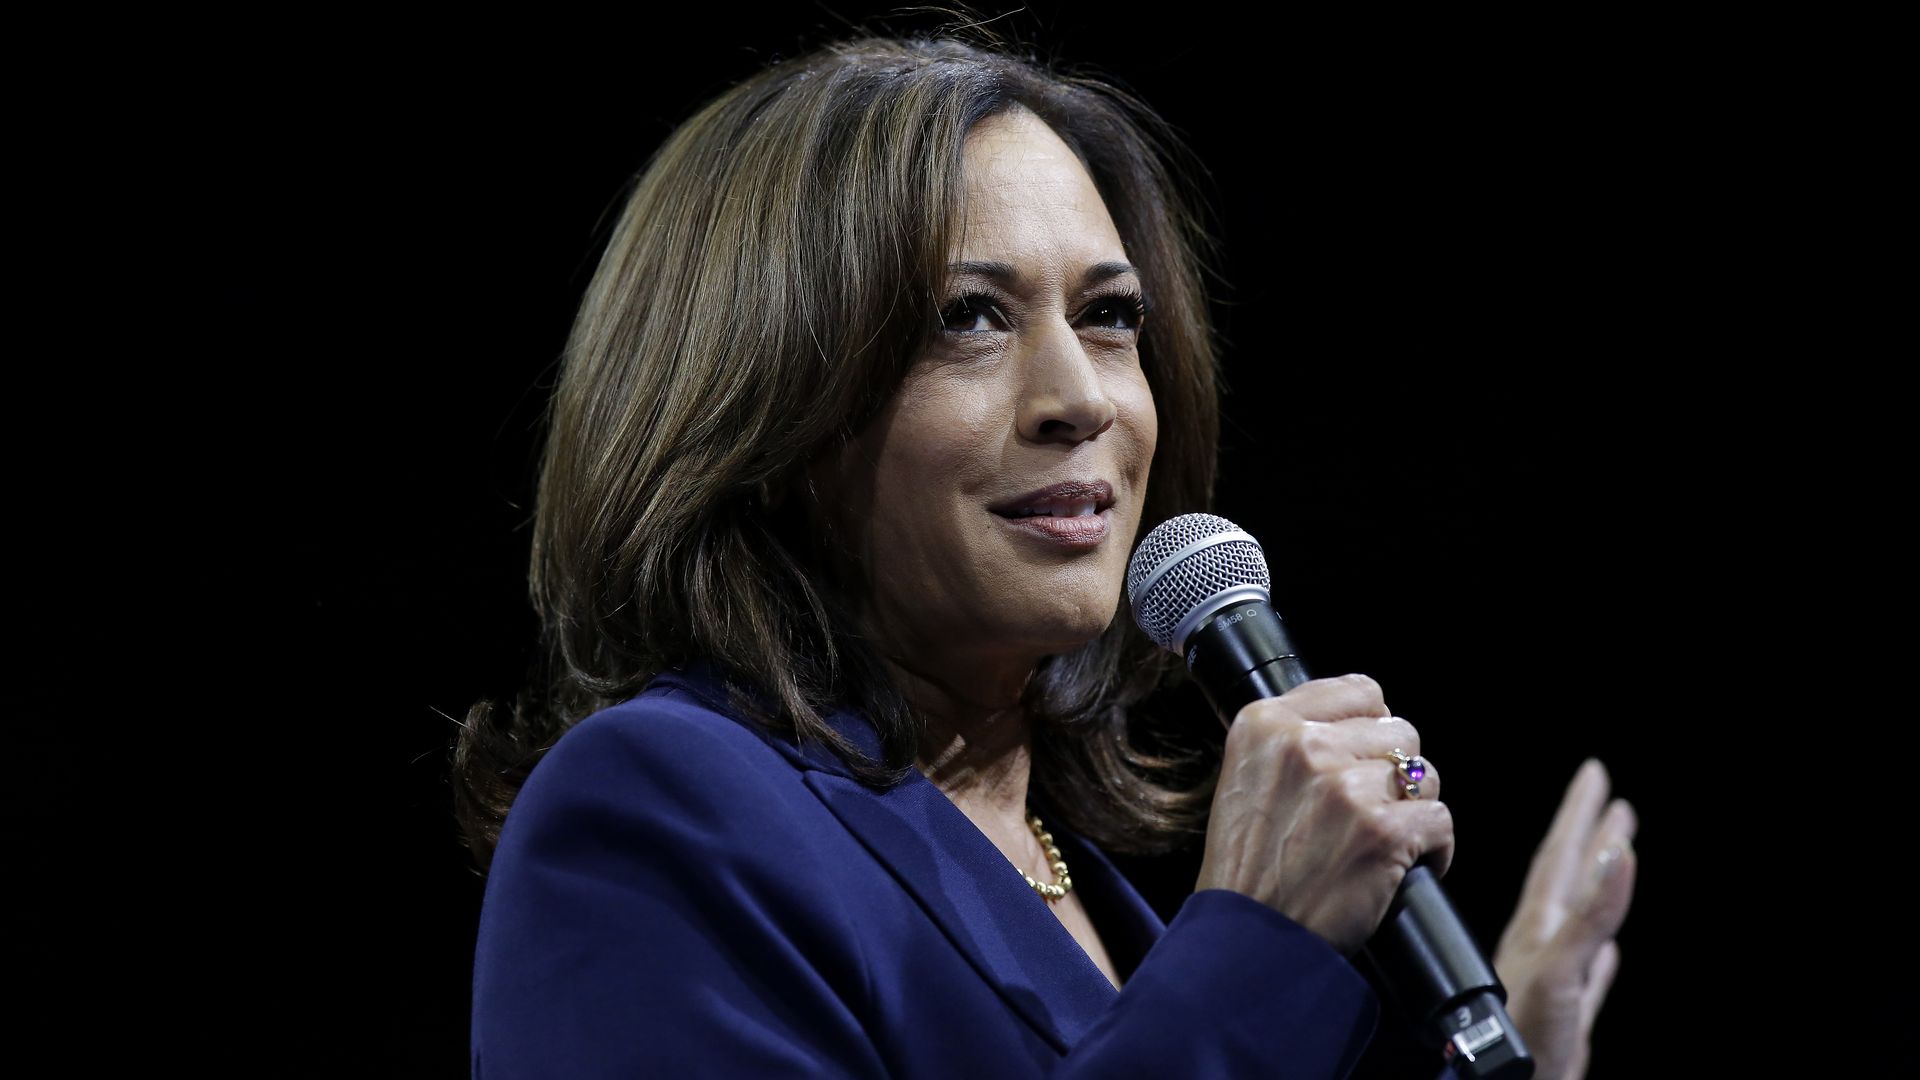 Presidential candidate Kamala Harris speaks during The Iowa Democratic Party Liberty & Justice Celebration on November 1, 2019 in Des Moines, Iowa.